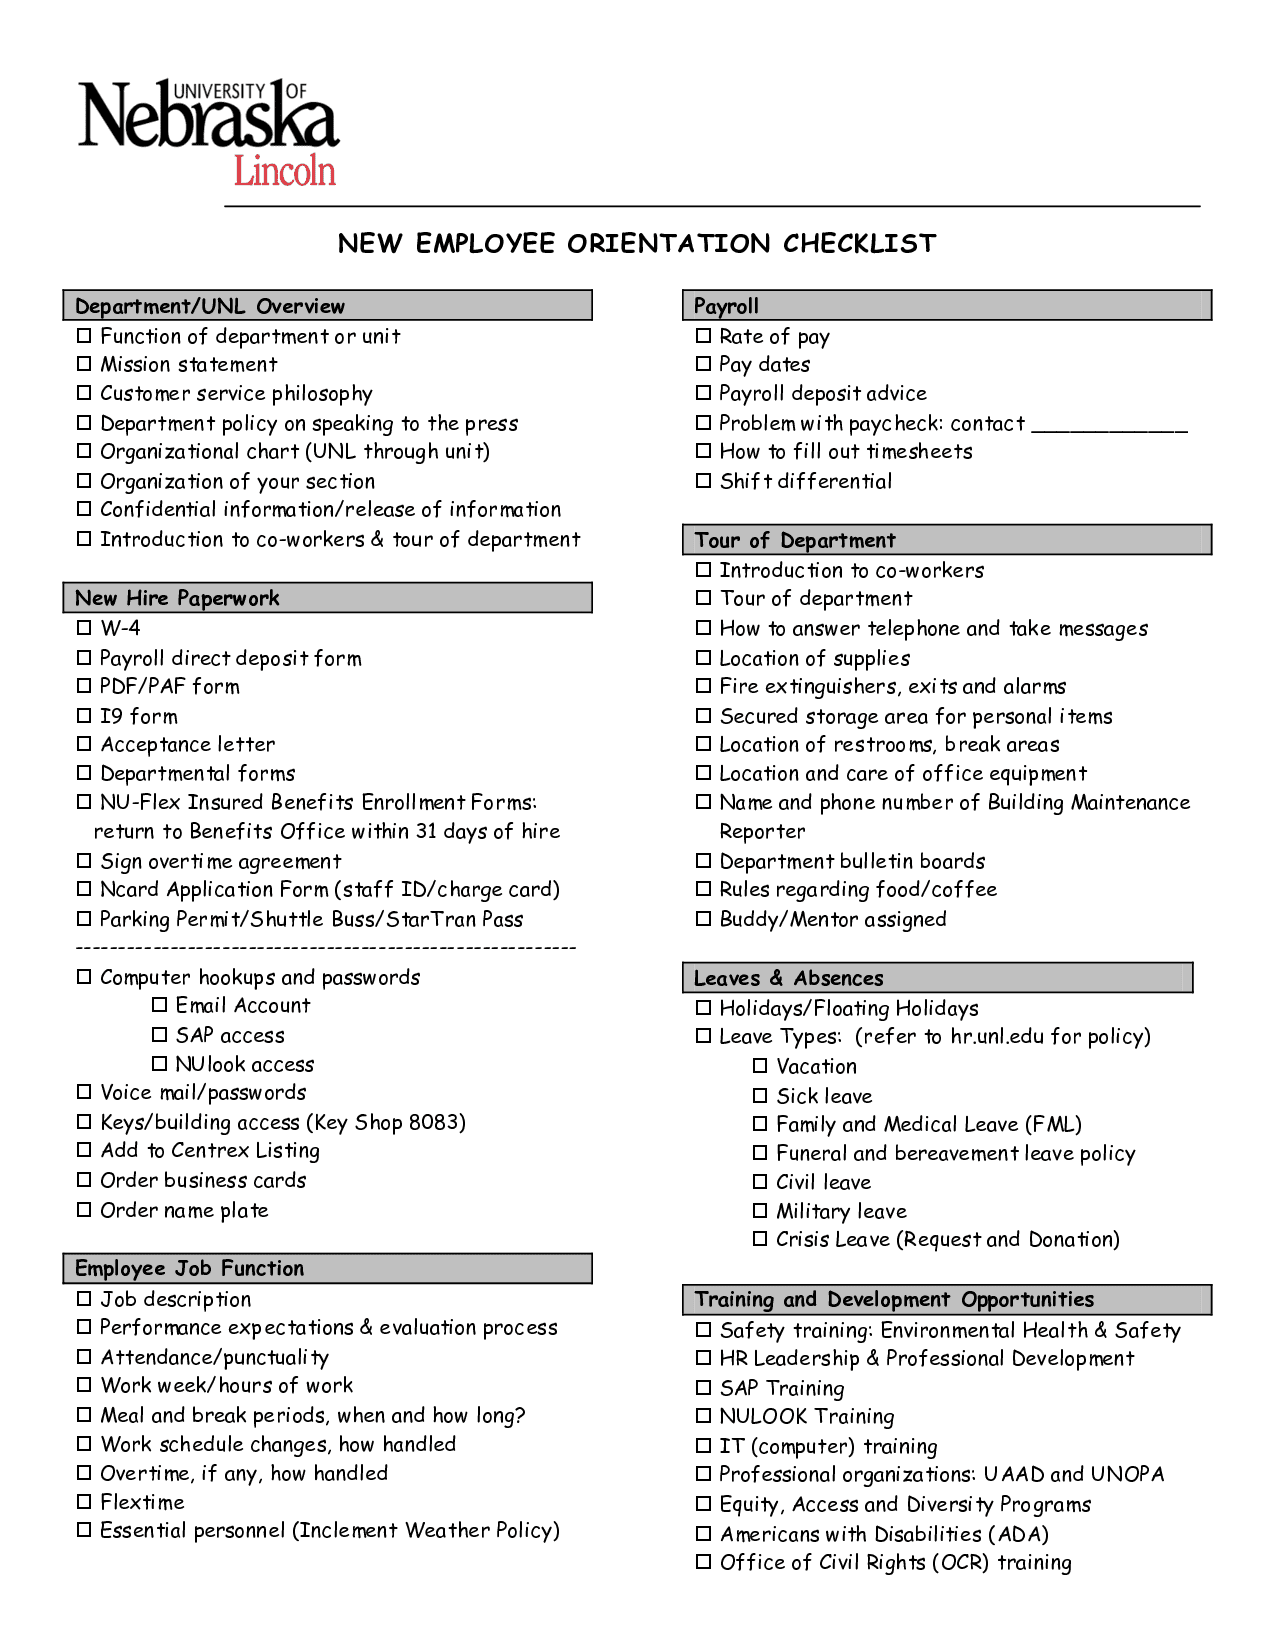 Funeral Planning Checklist Form And Printable Funeral Planning Checklist